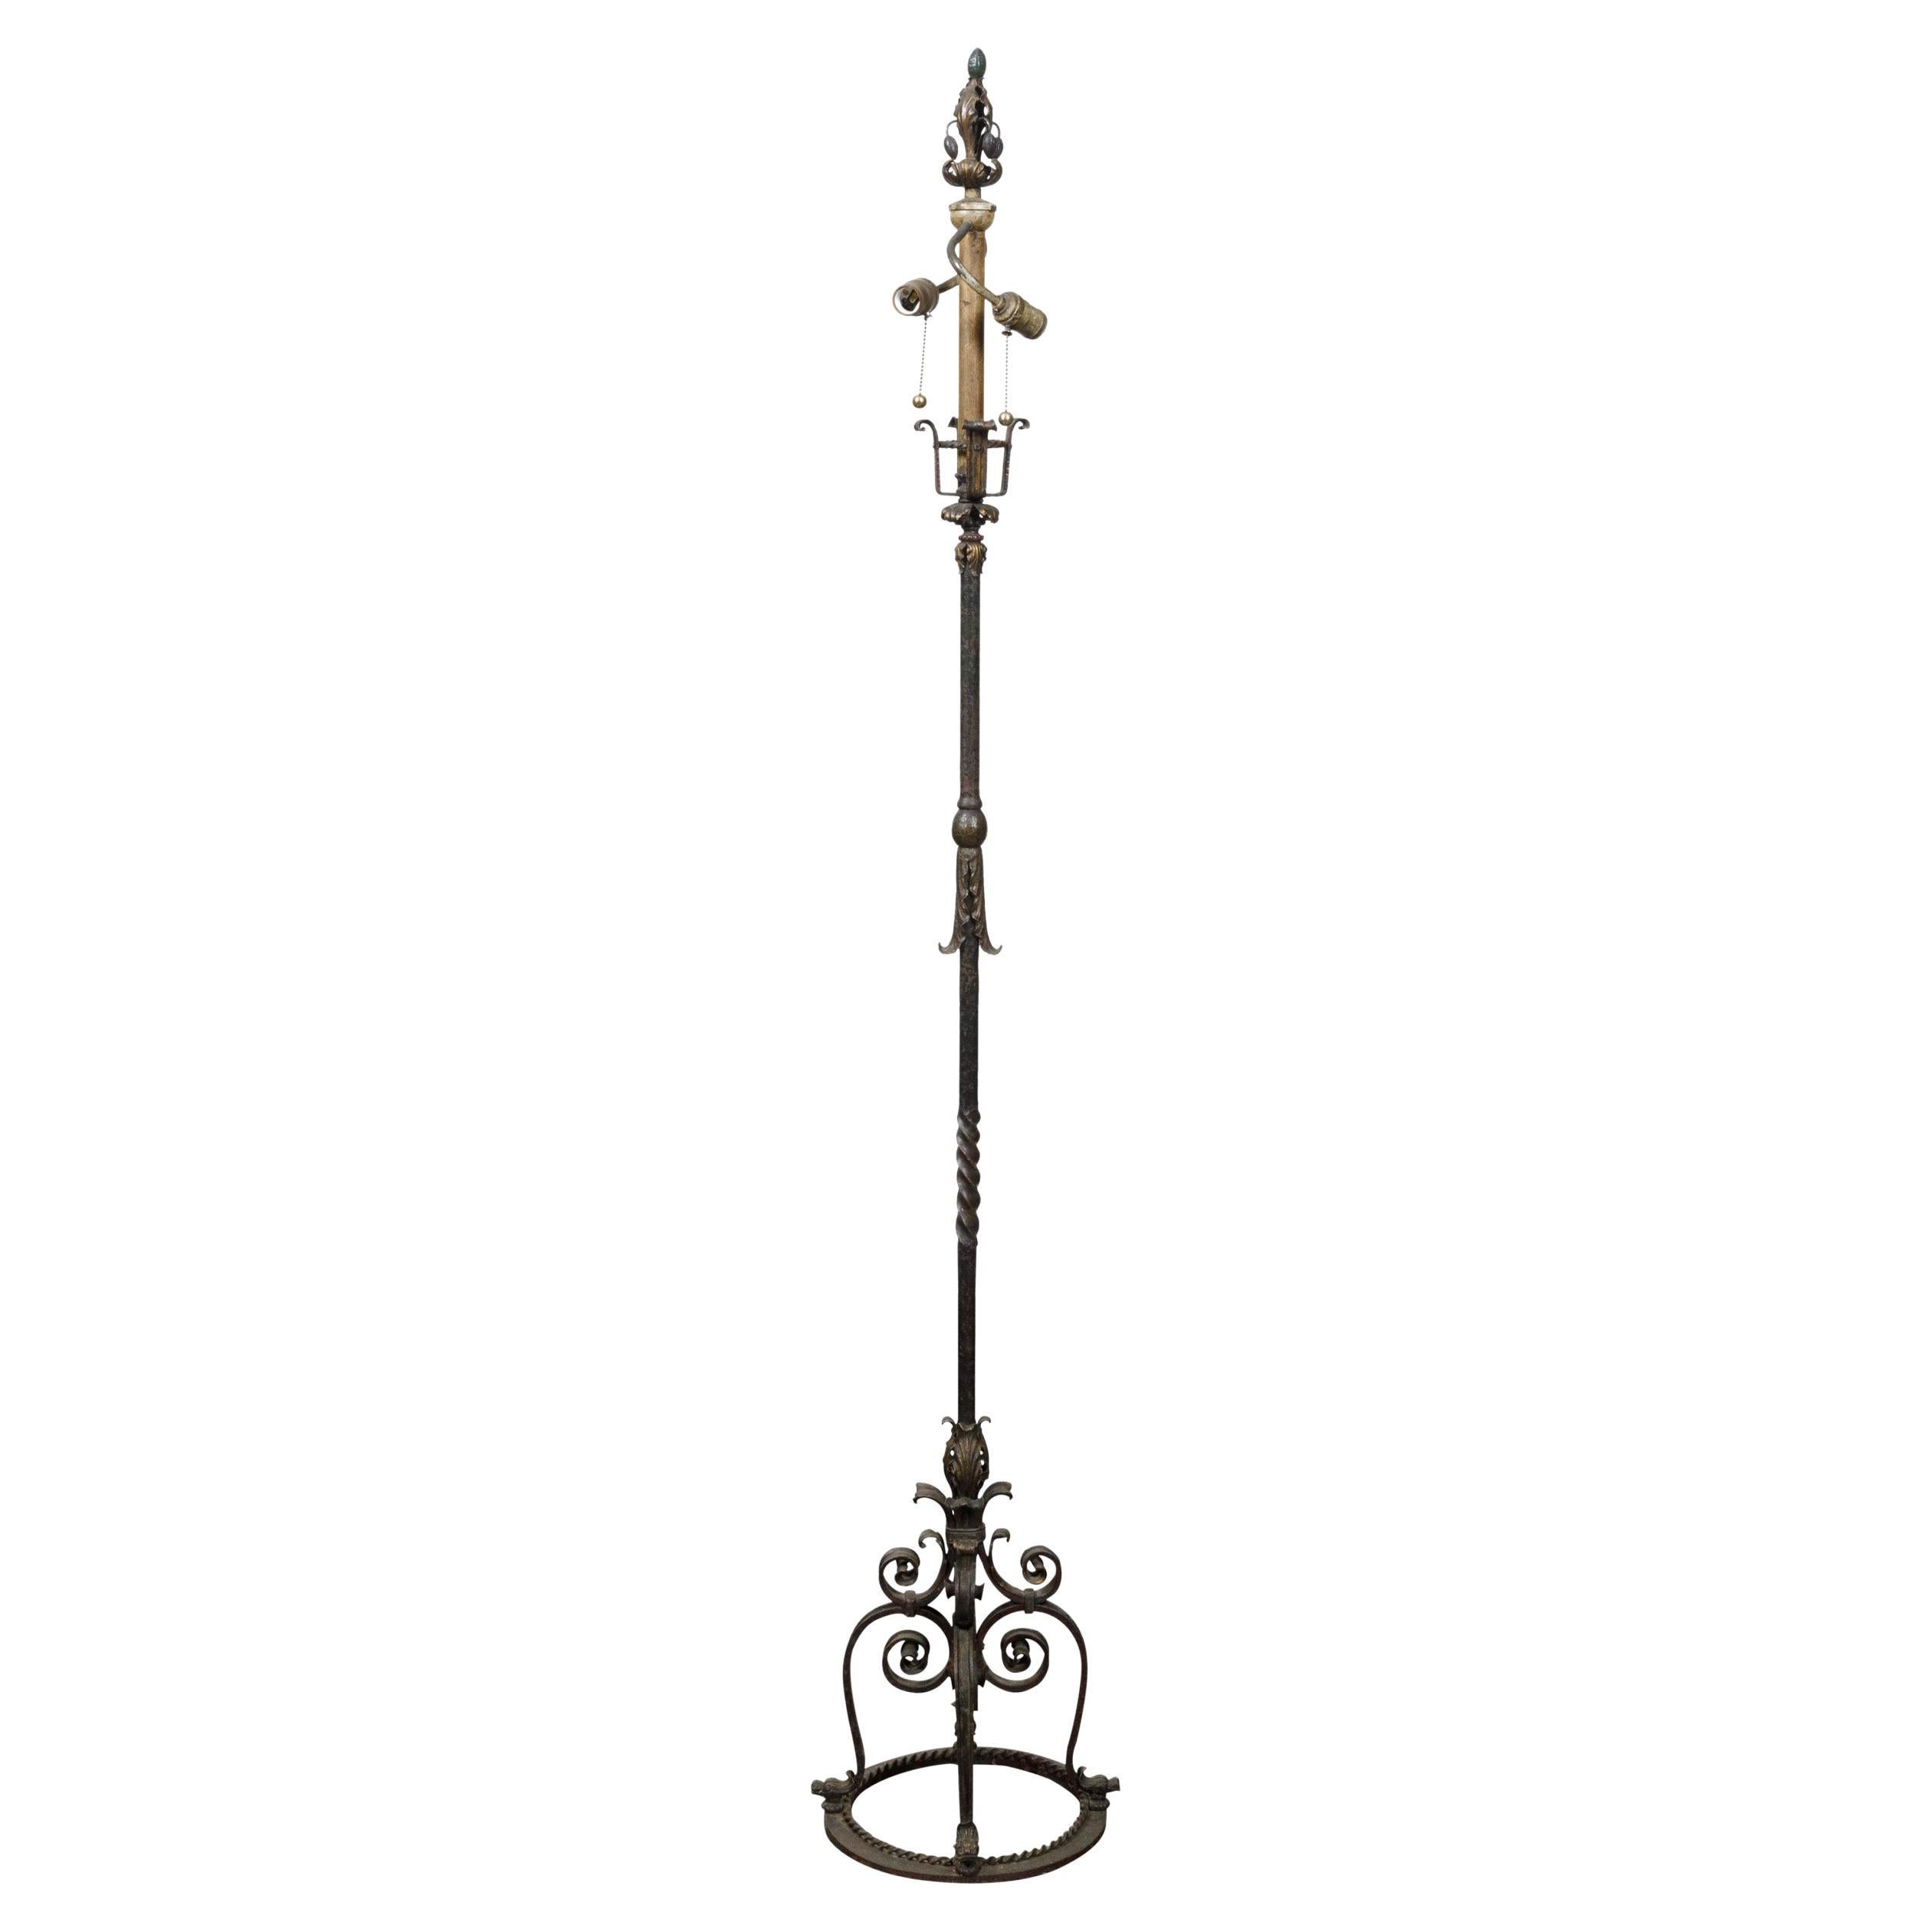 French Steel and Brass 1930s Floor Lamp with Scrolling Legs and Foliage Motifs